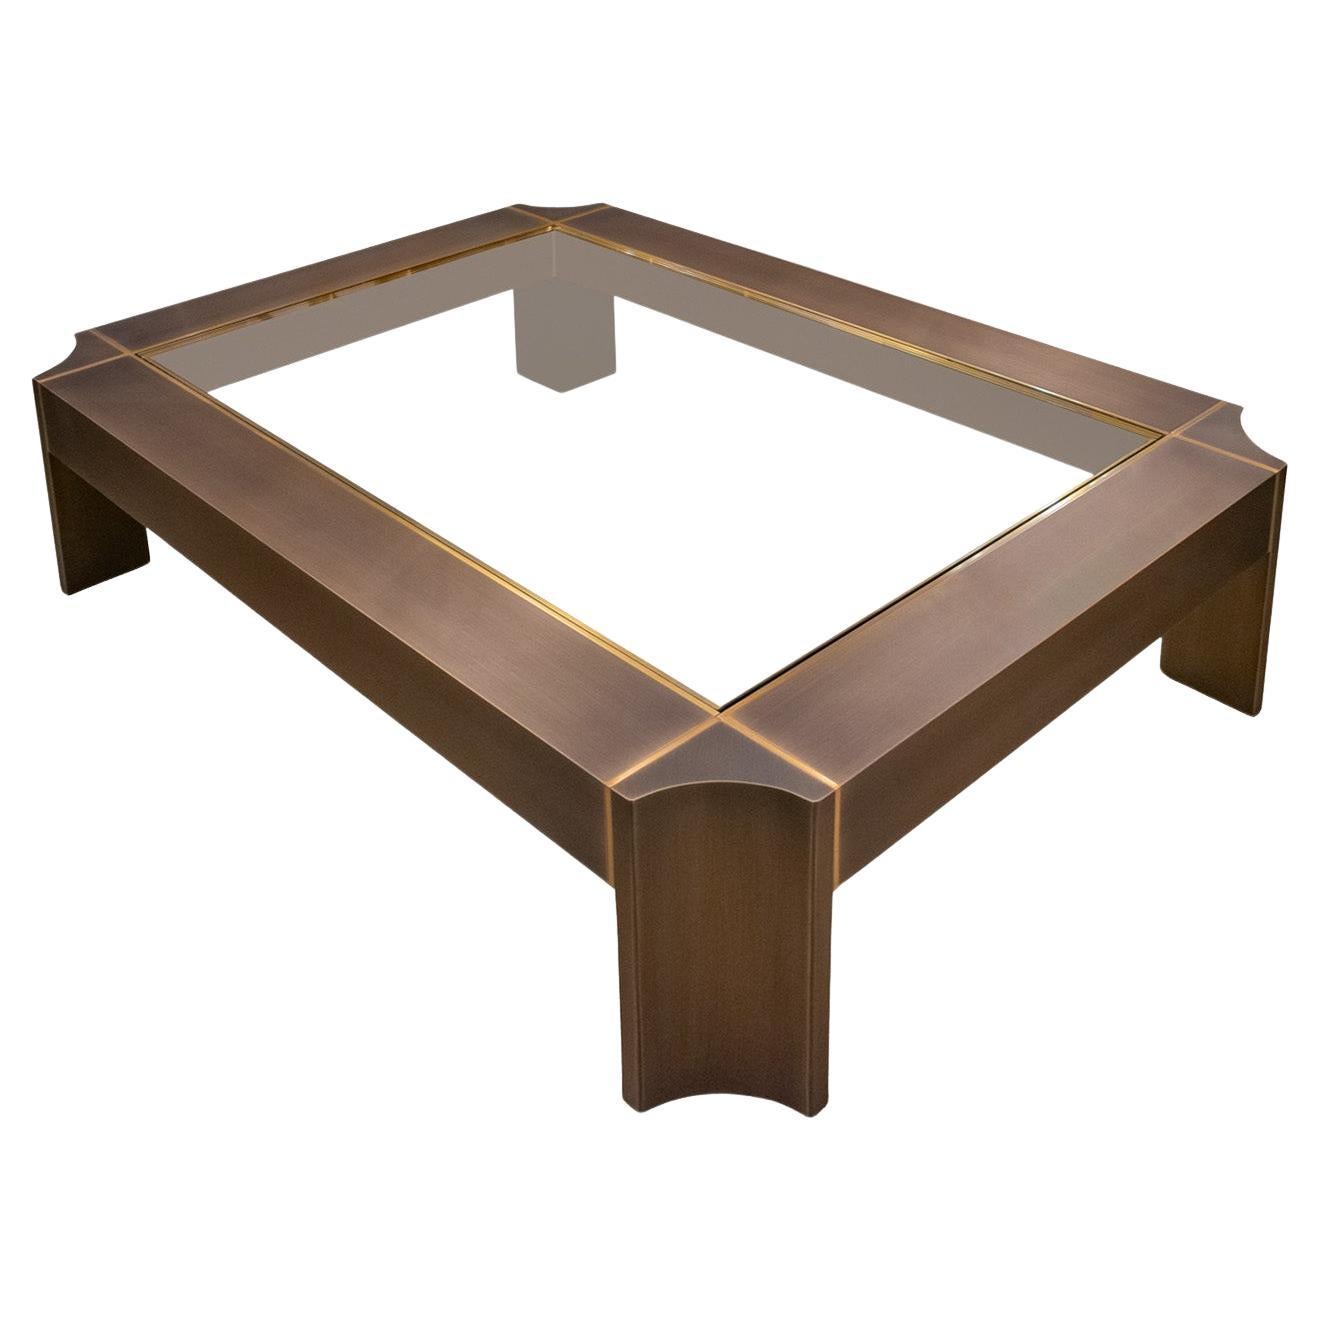 Karl Springer Exceptional "Art Moderne Coffee Table" in Satin Bronze 1980s For Sale